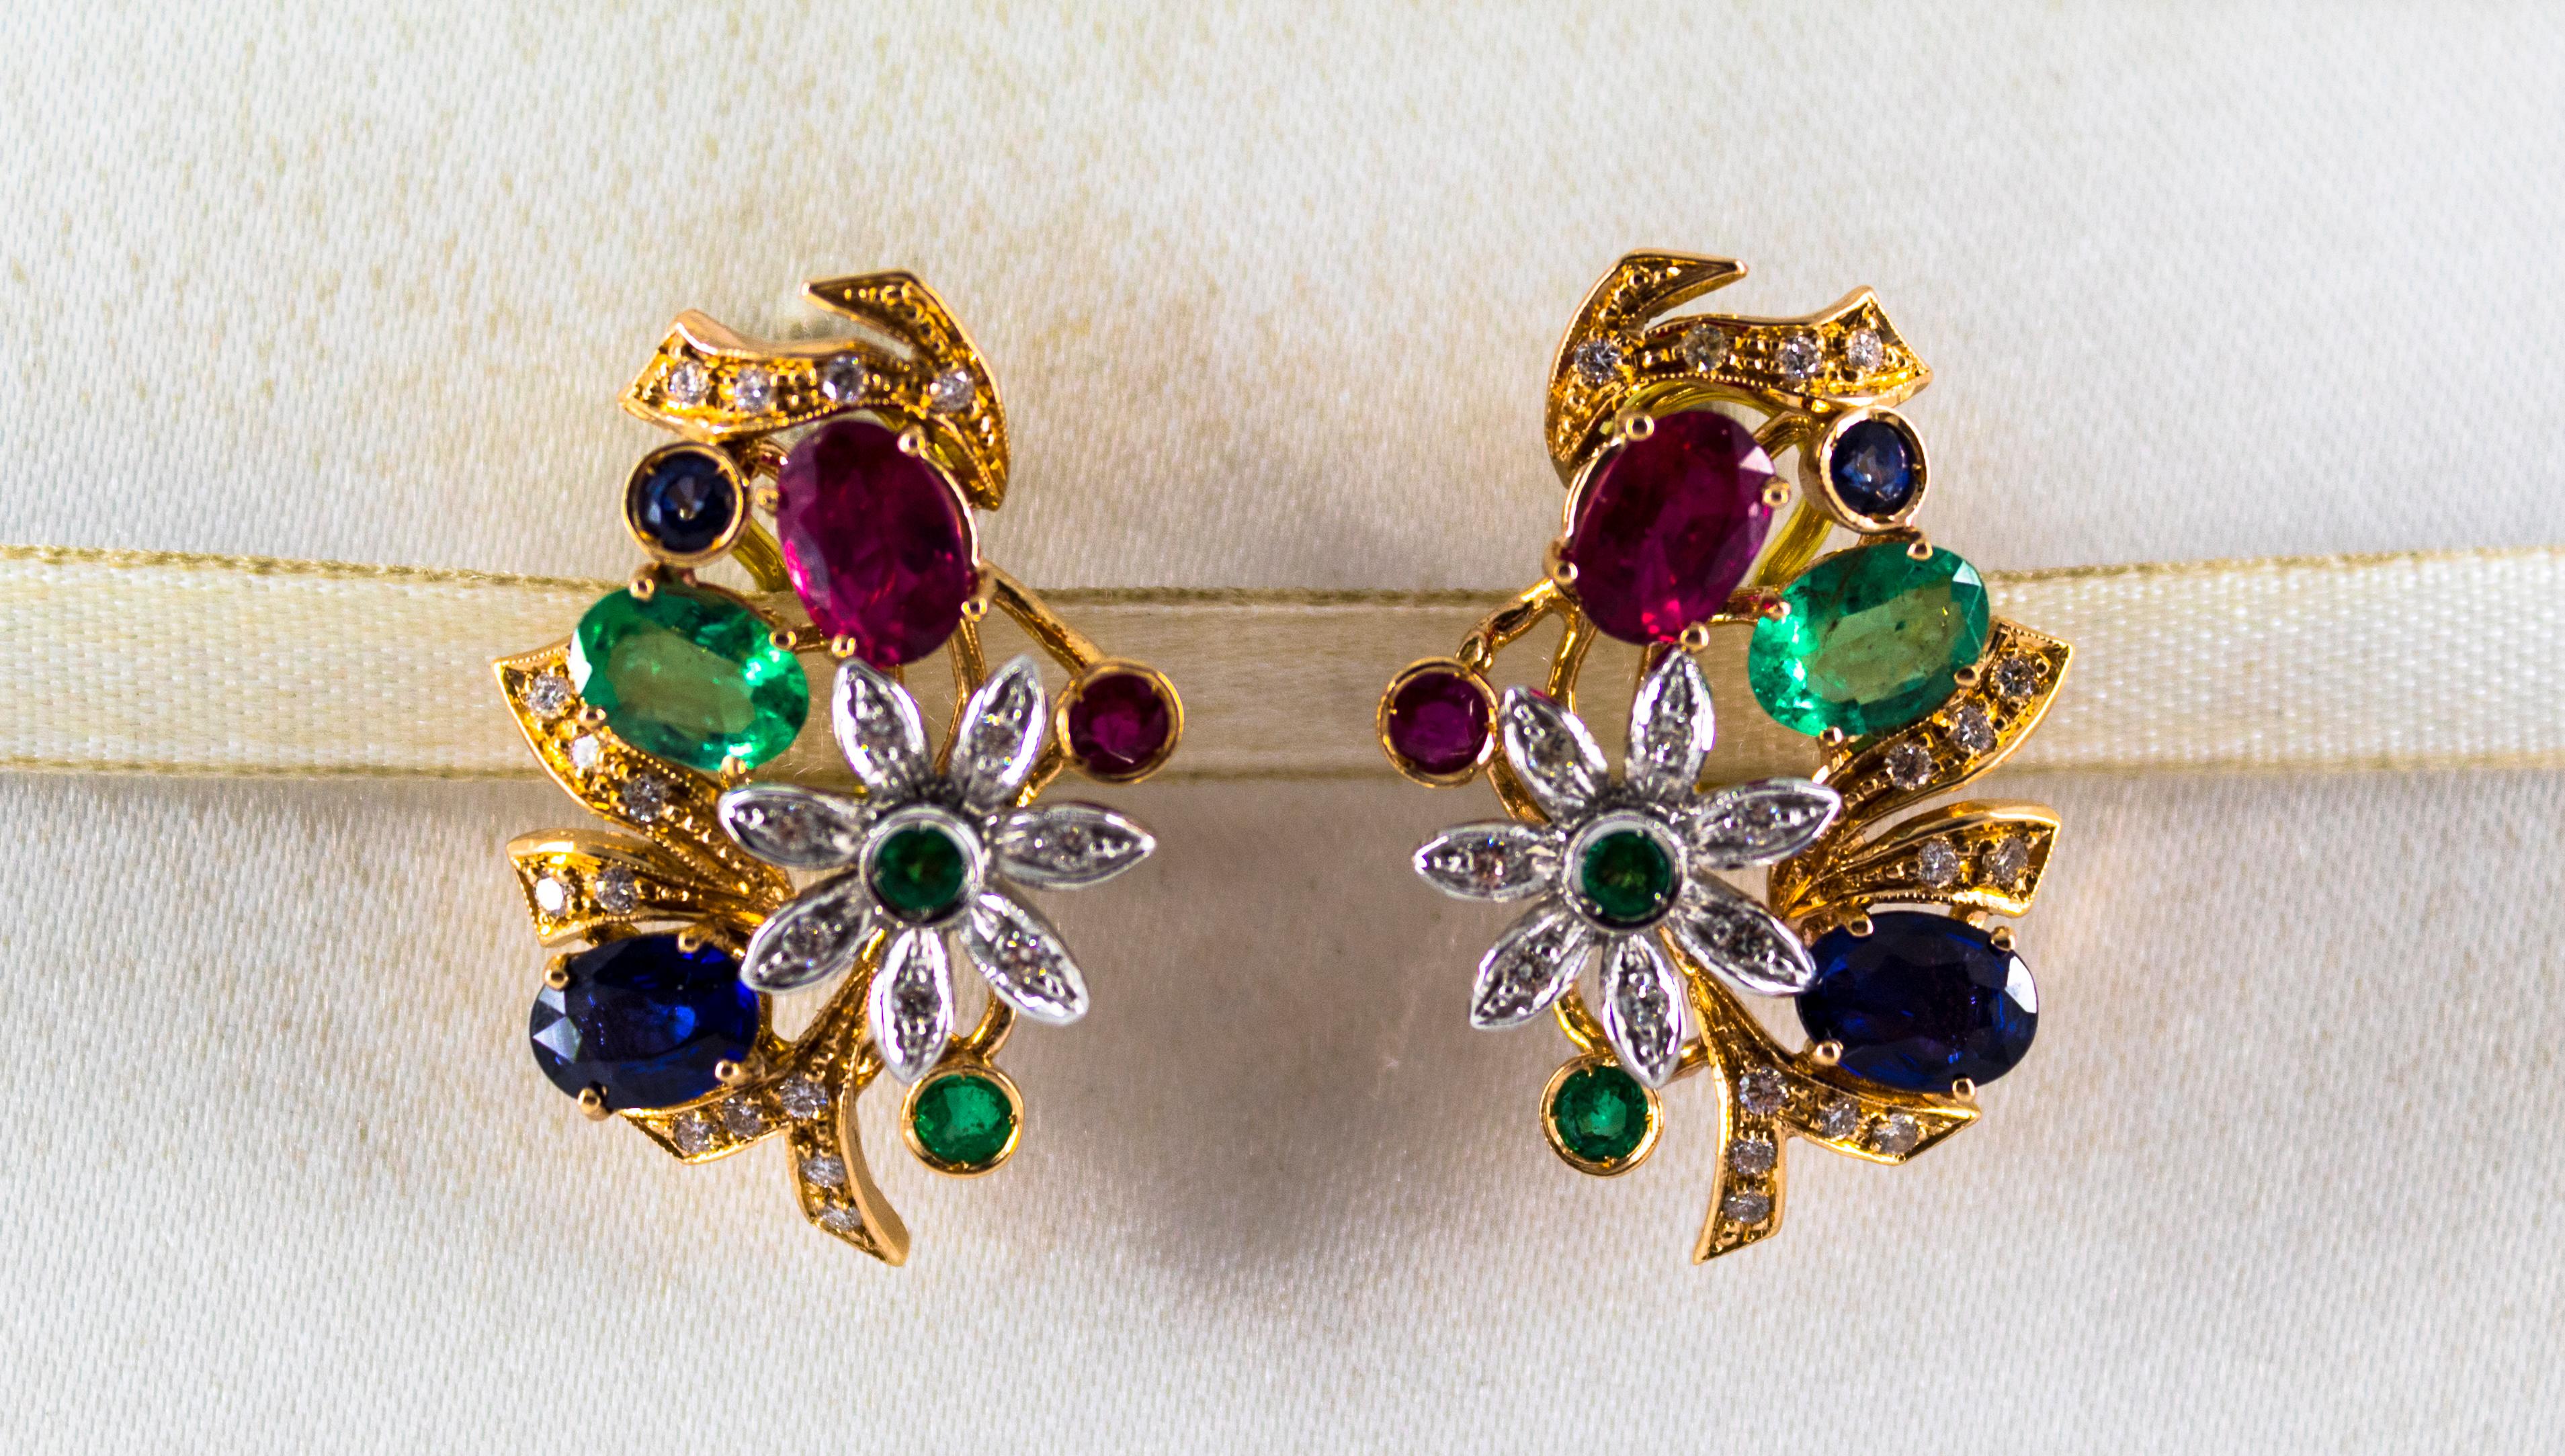 These Clip-On Earrings are made of 14K Yellow Gold.
These Earrings have 0.40 Carats of White Brilliant Cut Diamonds.
These Earrings have 1.80 Carats of Emeralds.
These Earrings have 1.70 Carats of Rubies.
These Earrings have 1.70 Carats of Blue